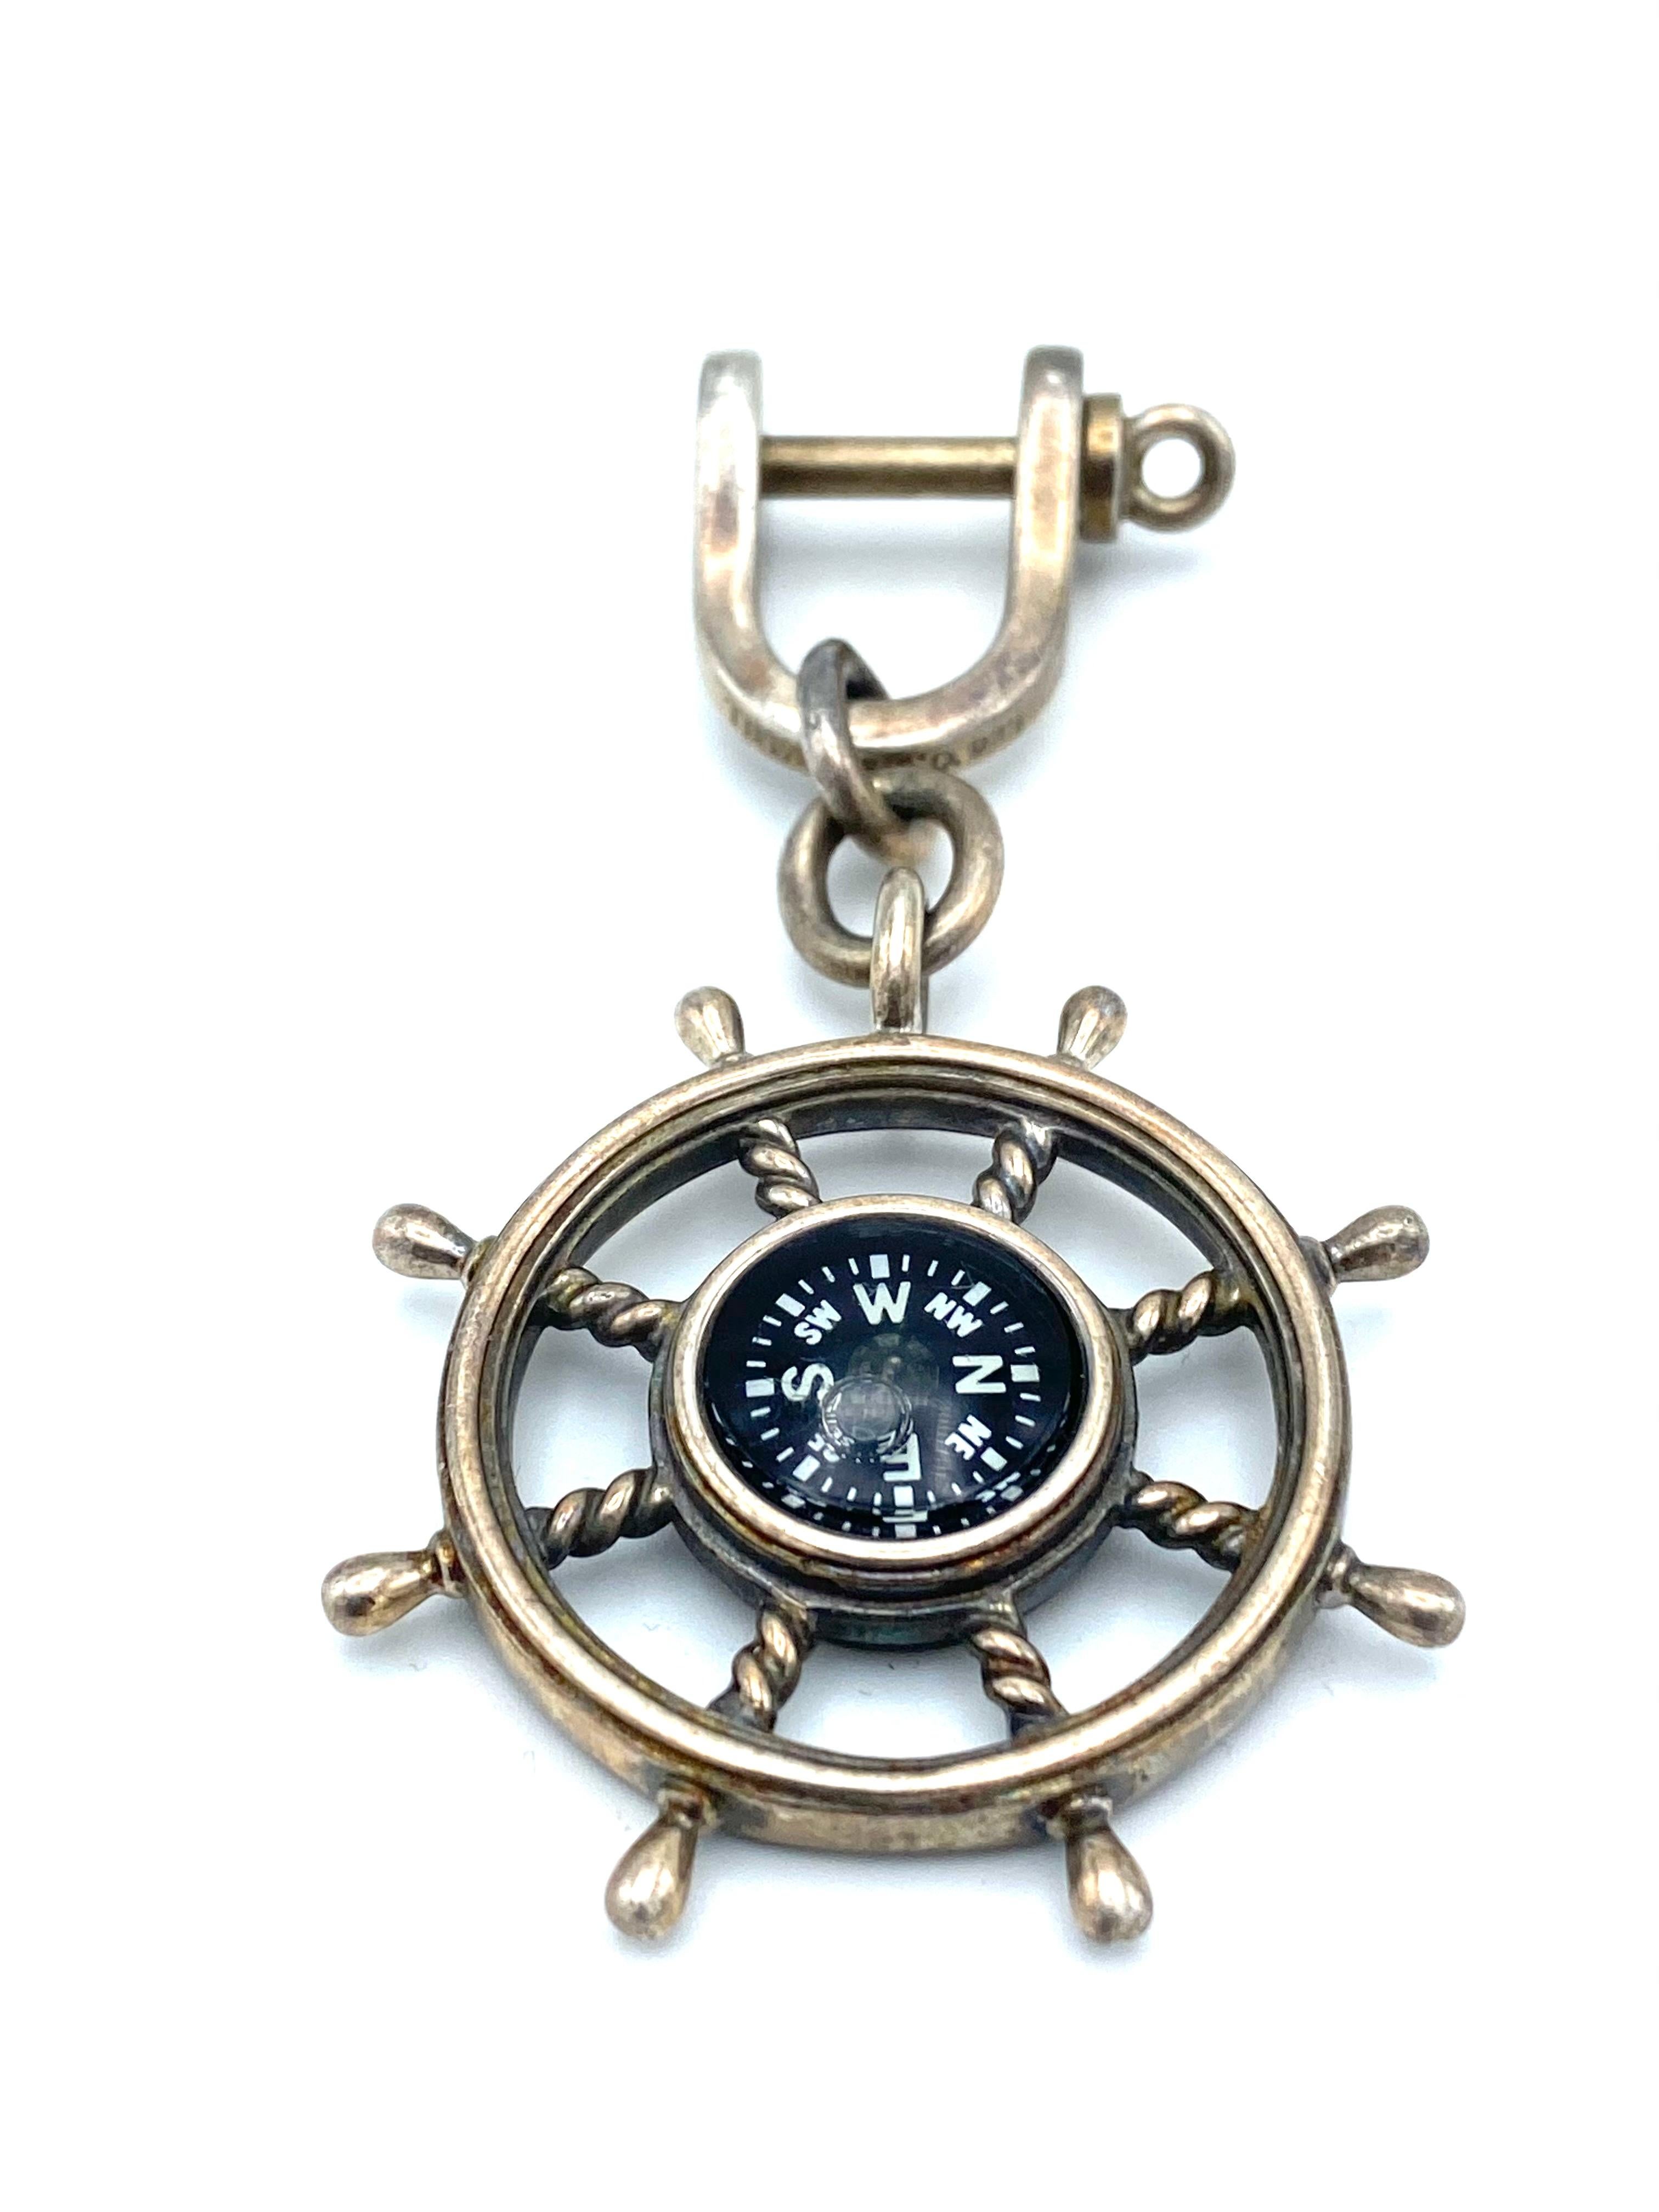 Product details:

925 sterling silver and enamel compass in the ship's wheel on a key chain with screw in closure, featuring nautical motif designed by Tiffany and Company.
Signed by Tiffany & Co., stamped with 925 hallmark for sterling